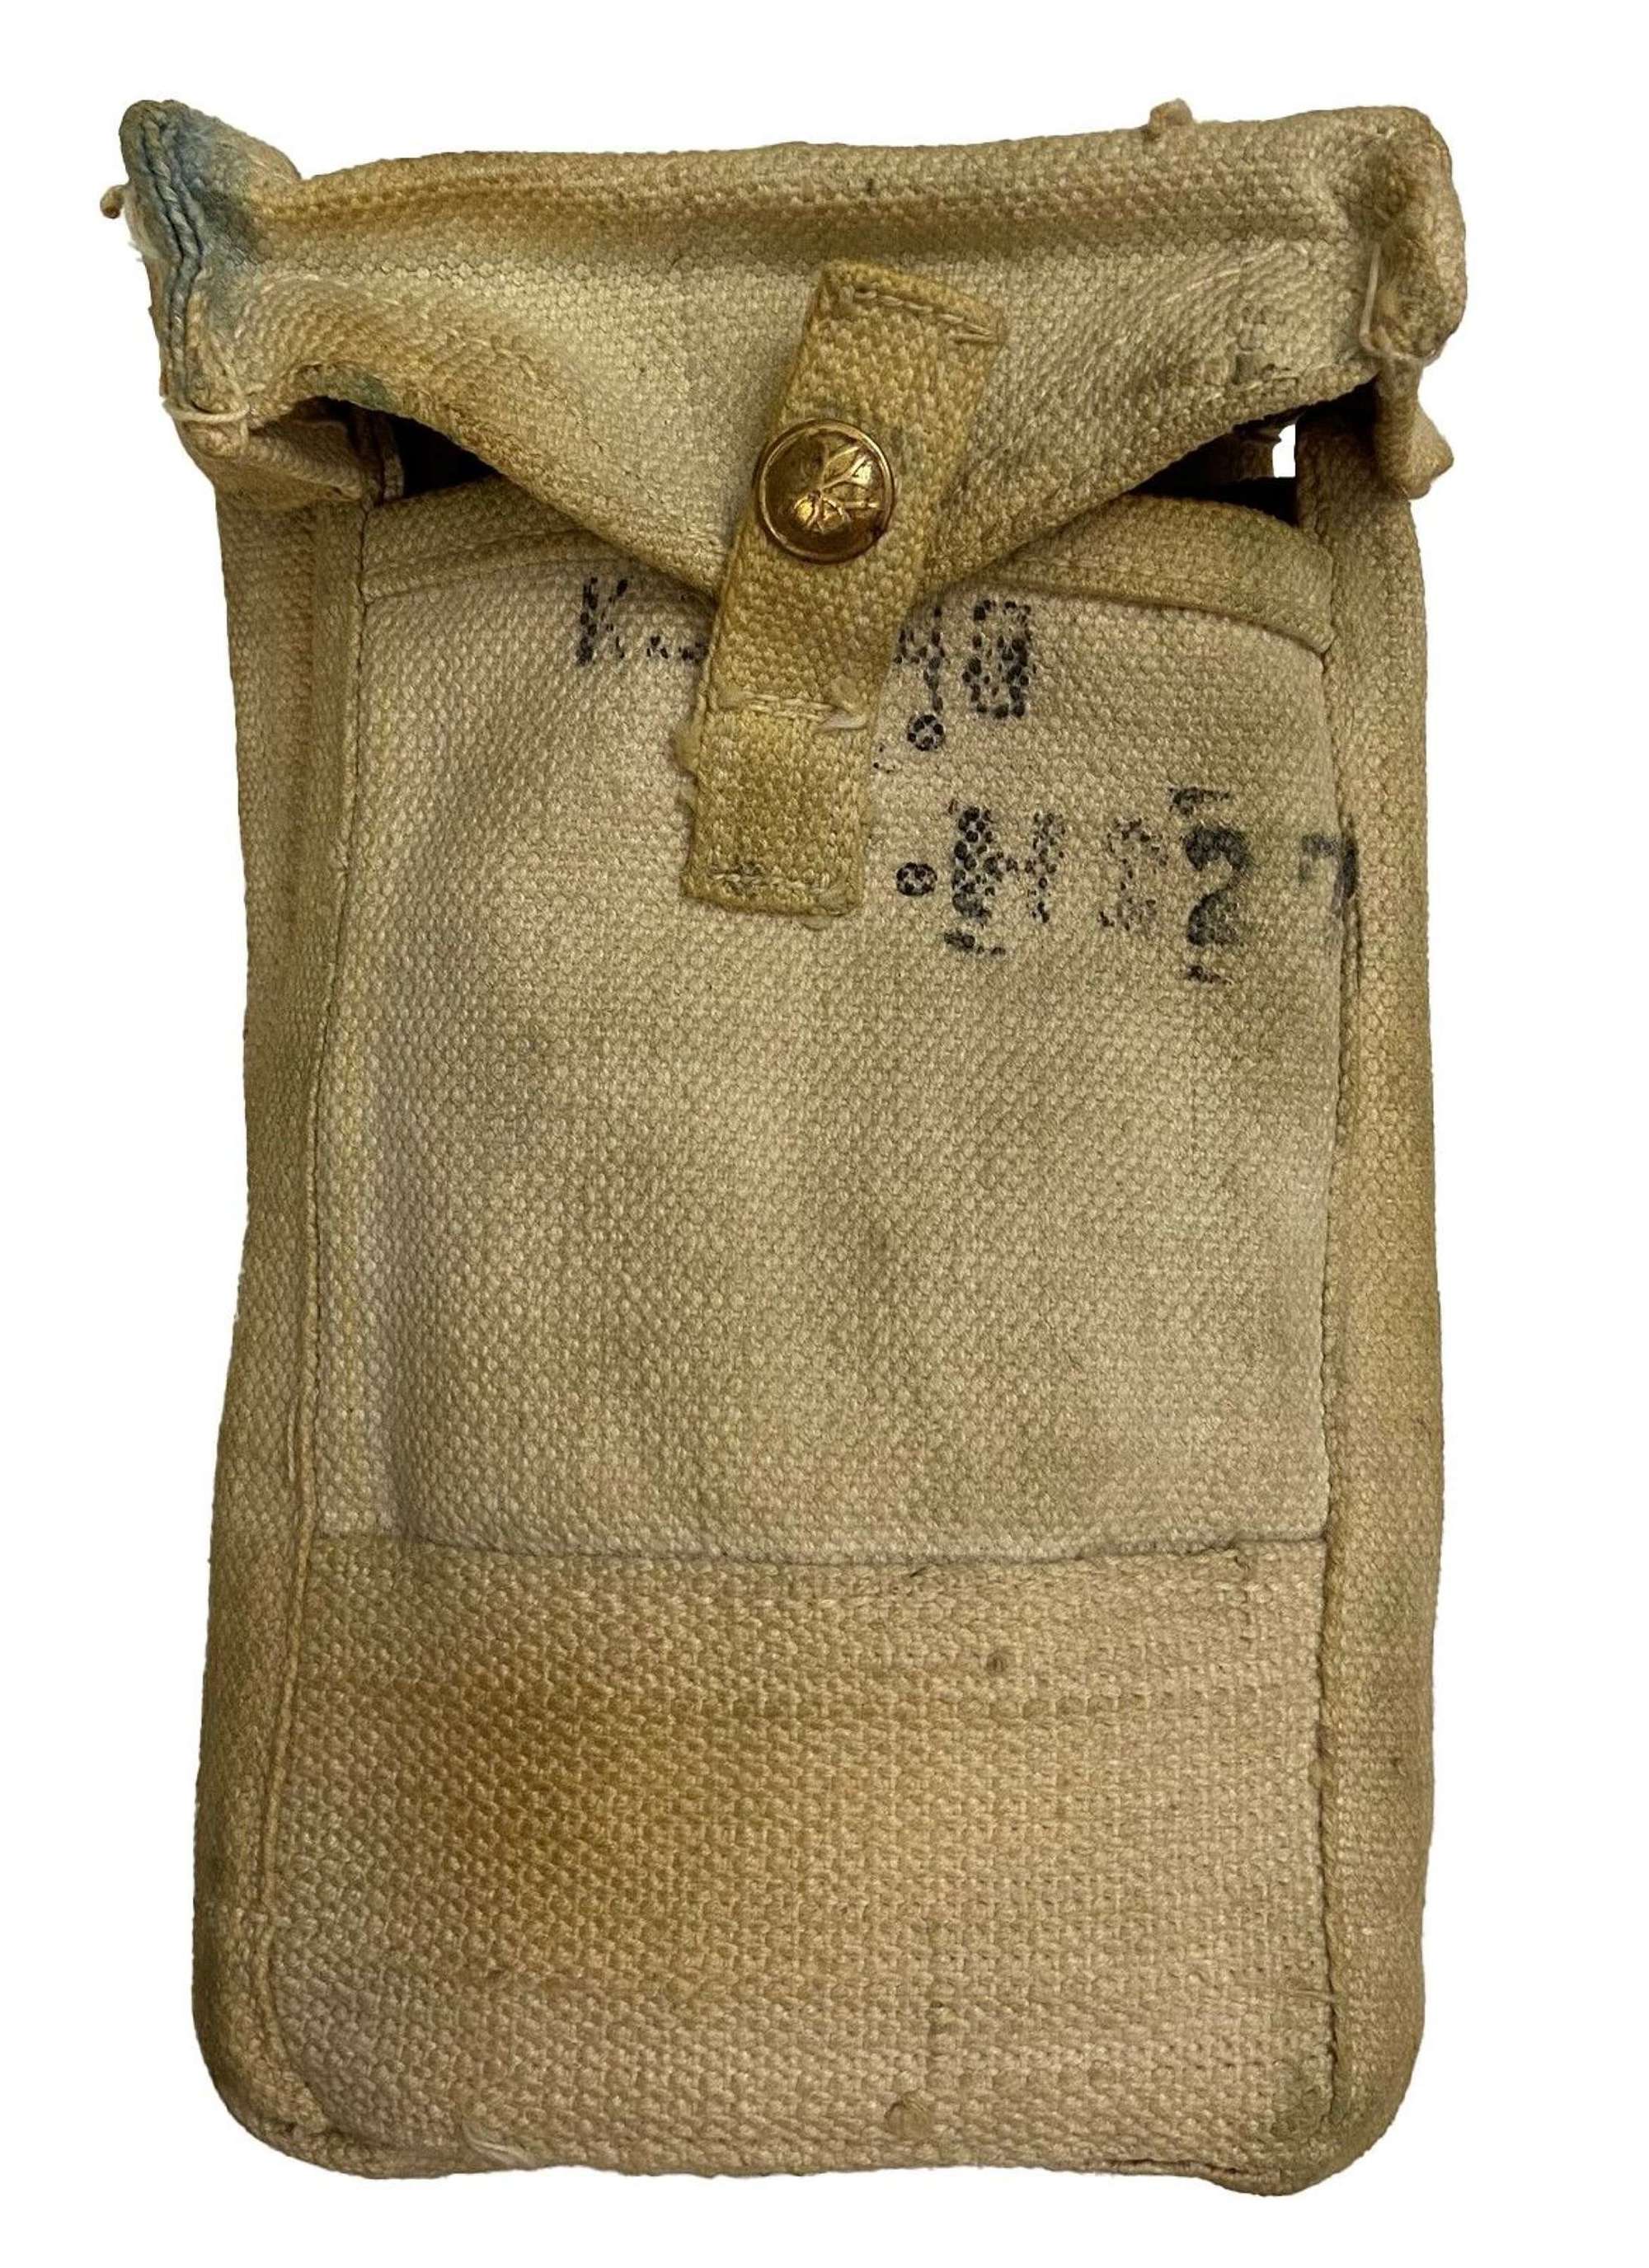 Original 1940 Dated Indian Made MKI Universal Pouch